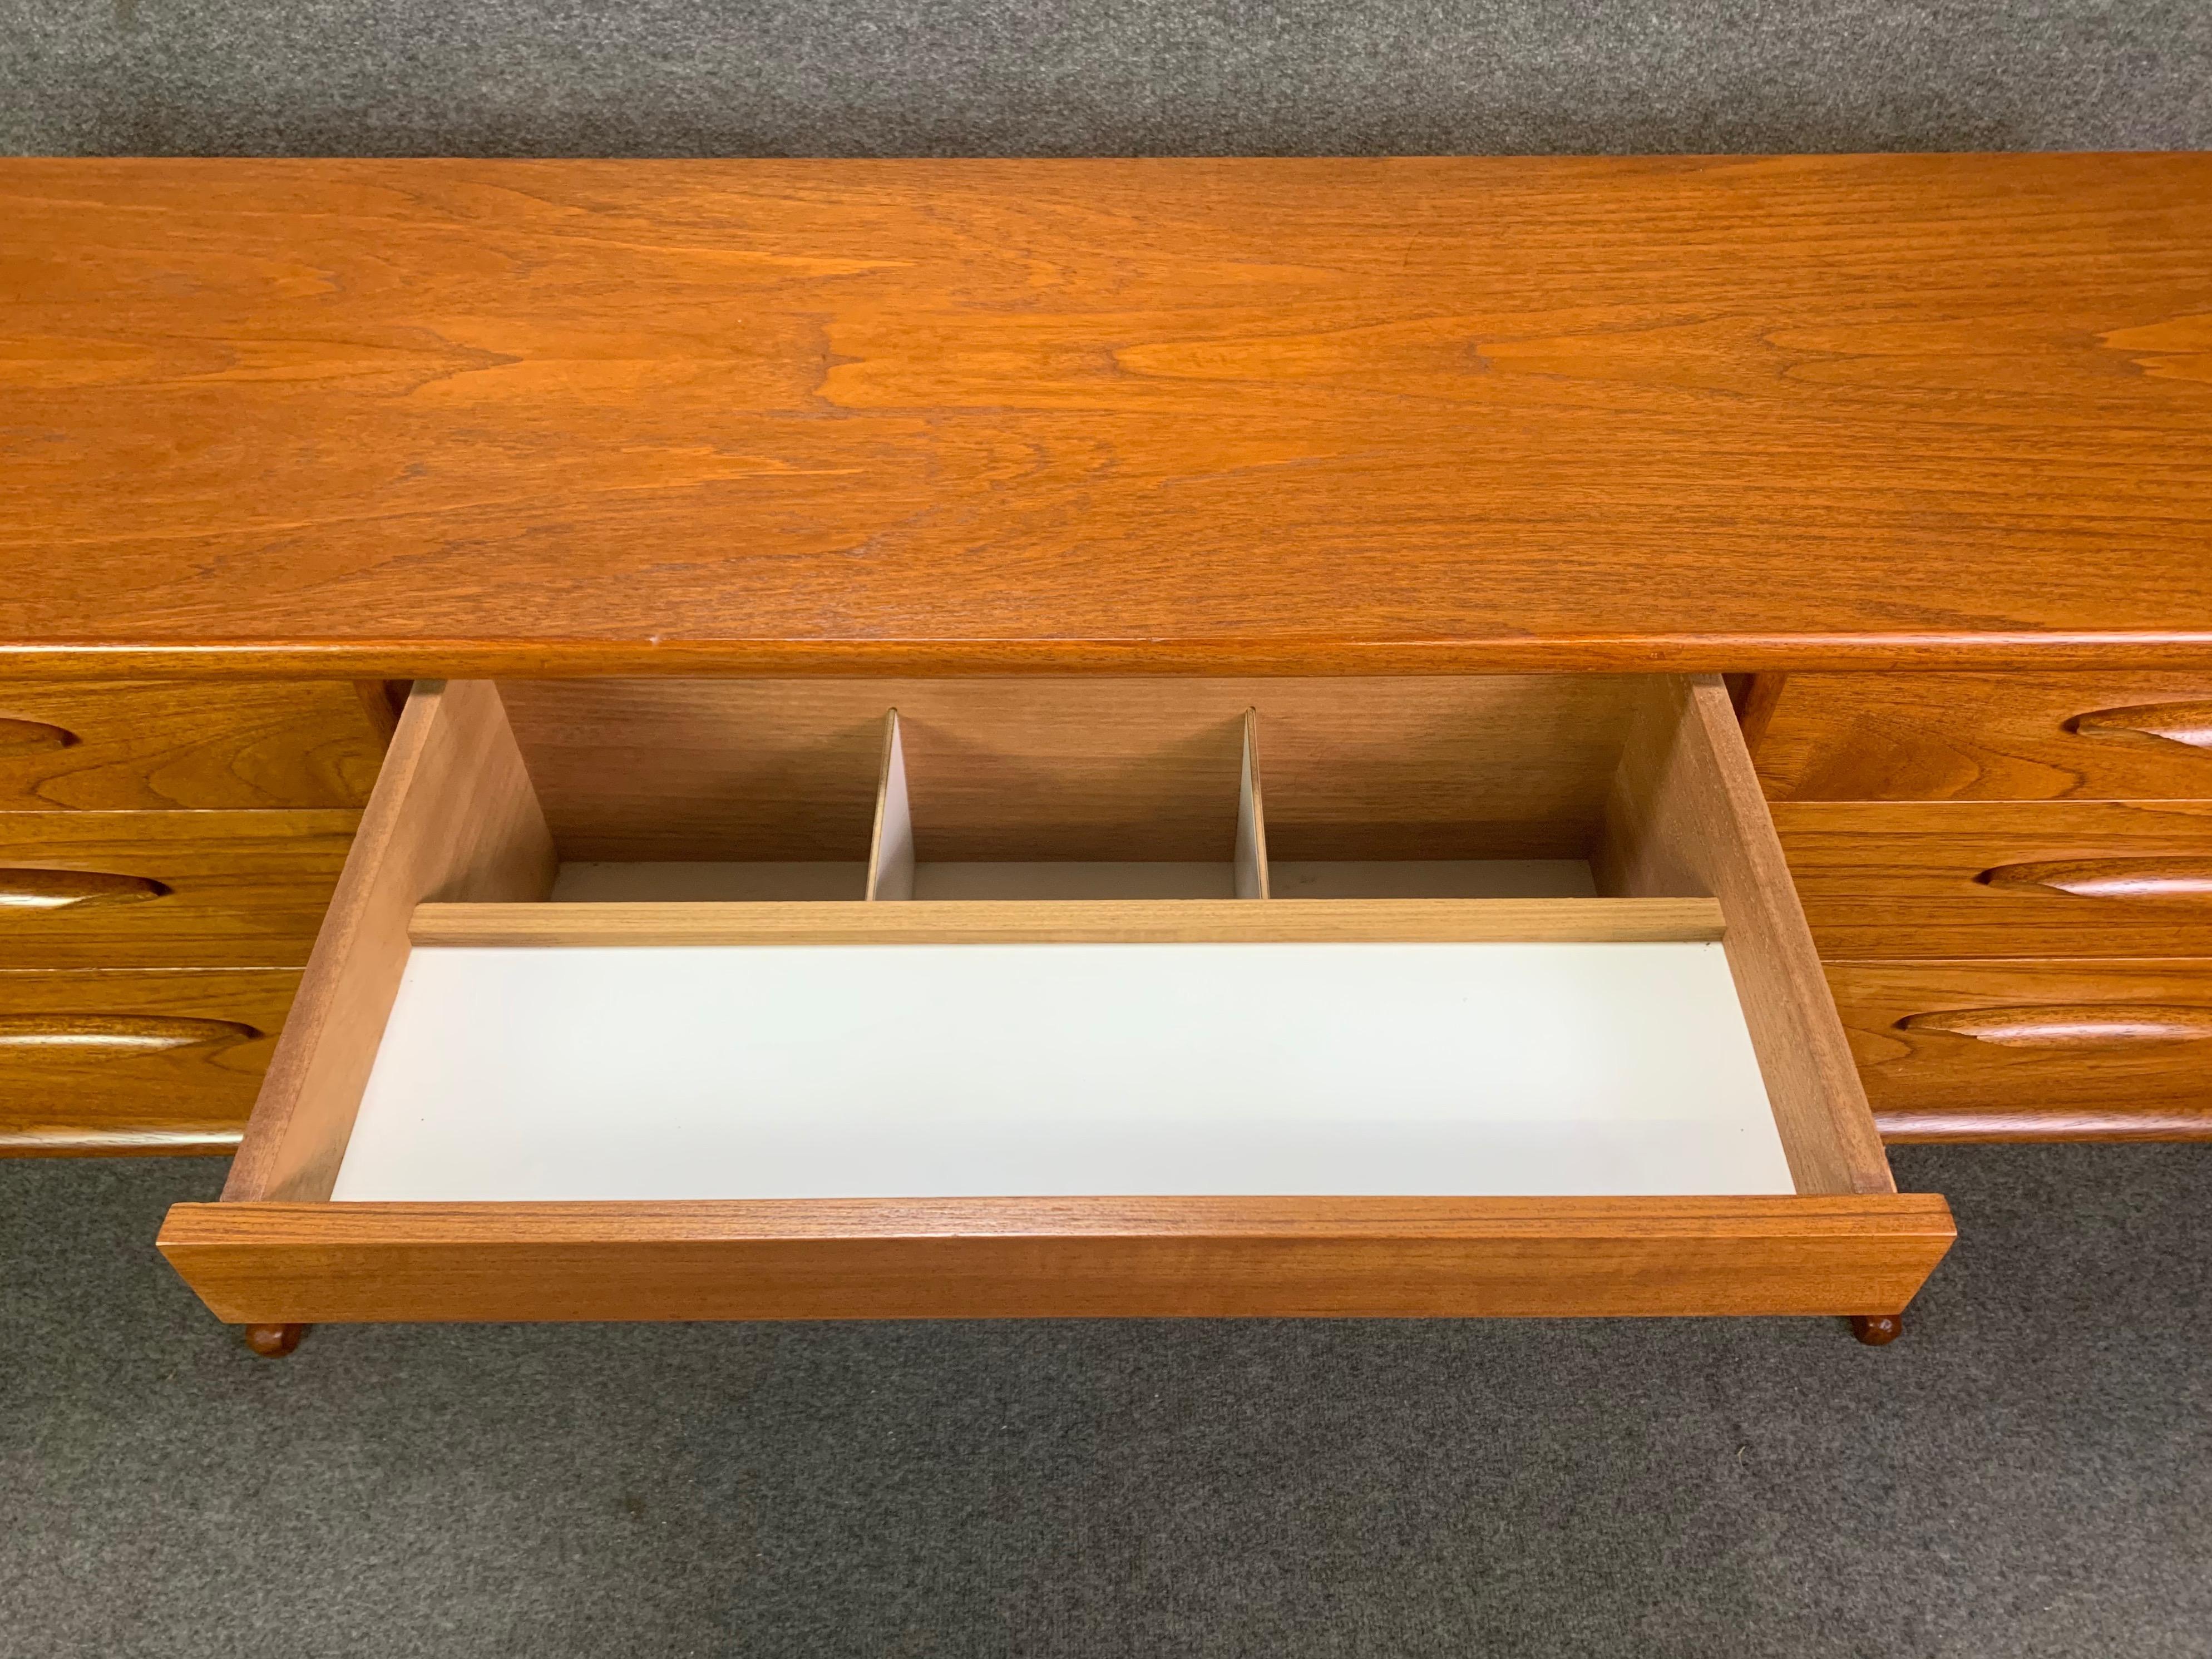 Here is beautiful Mid-Century Modern desk in teak wood designed by Frank Guille and manufactured by Austinsuitein England in the 1960s.
This special piece, recently imported from the UK to California, features a vibrant wood grain, seven drawers